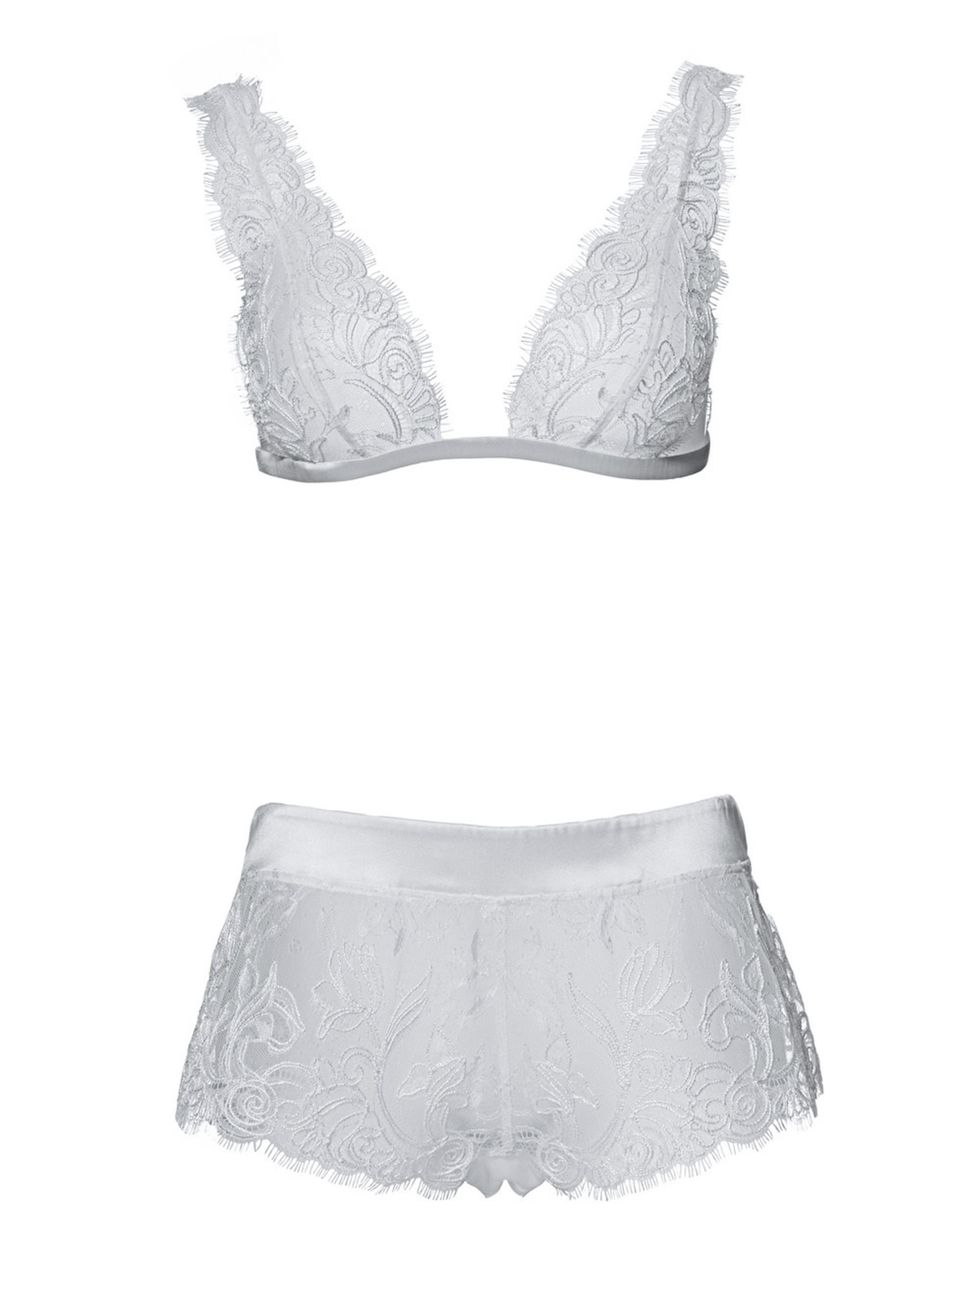 White, Grey, Silver, Drawing, Undergarment, 